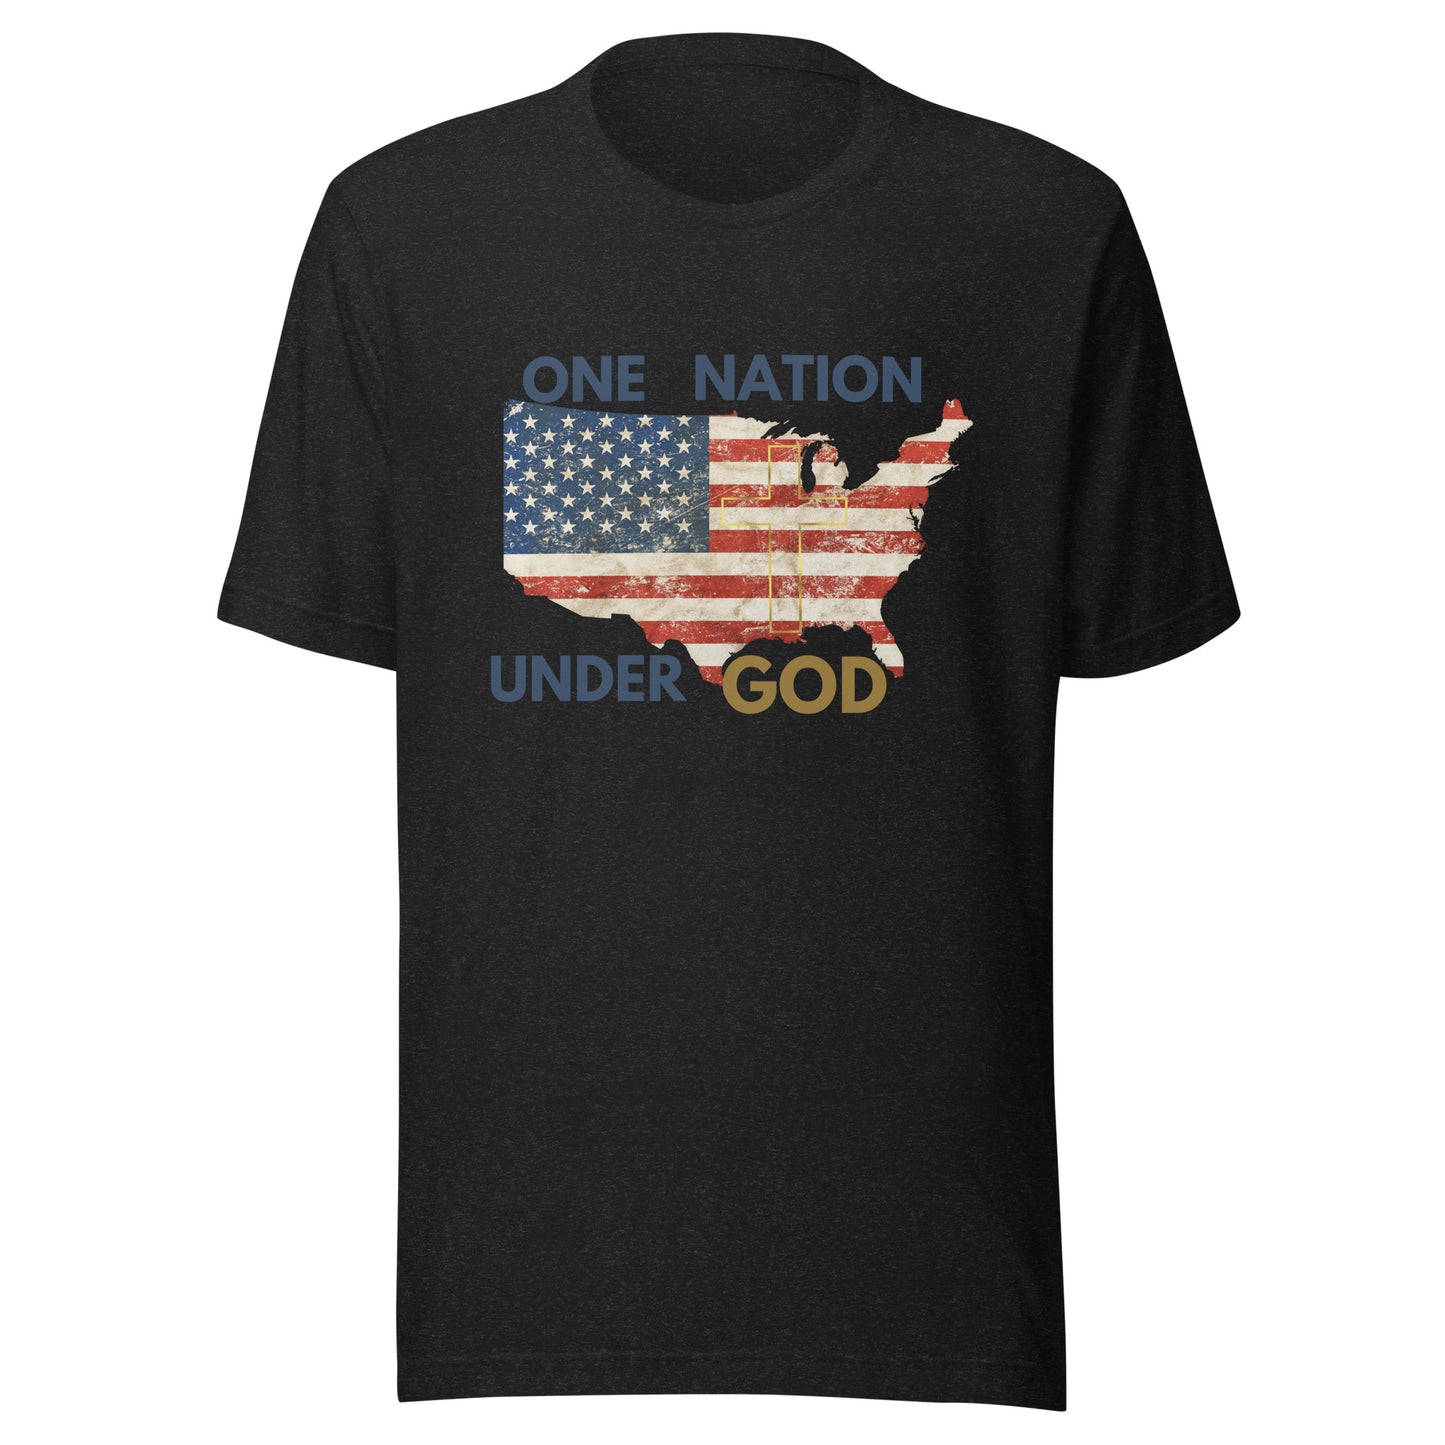 One Nation T-Shirt